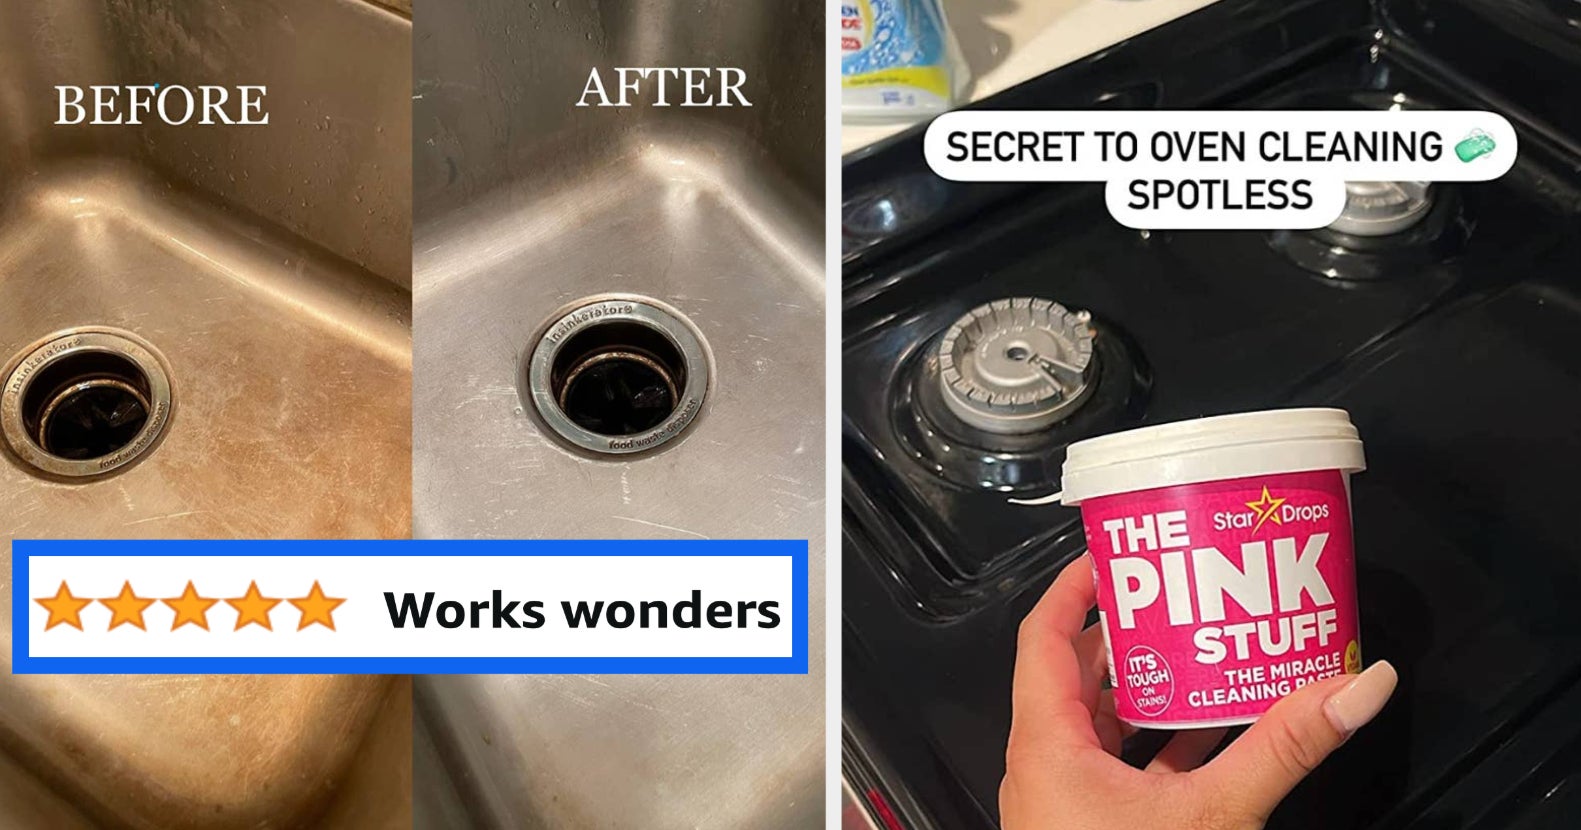 Just got The Pink Stuff, aside from cleaning the sink what can I use it  for? Can it be used on glass stove? : r/CleaningTips